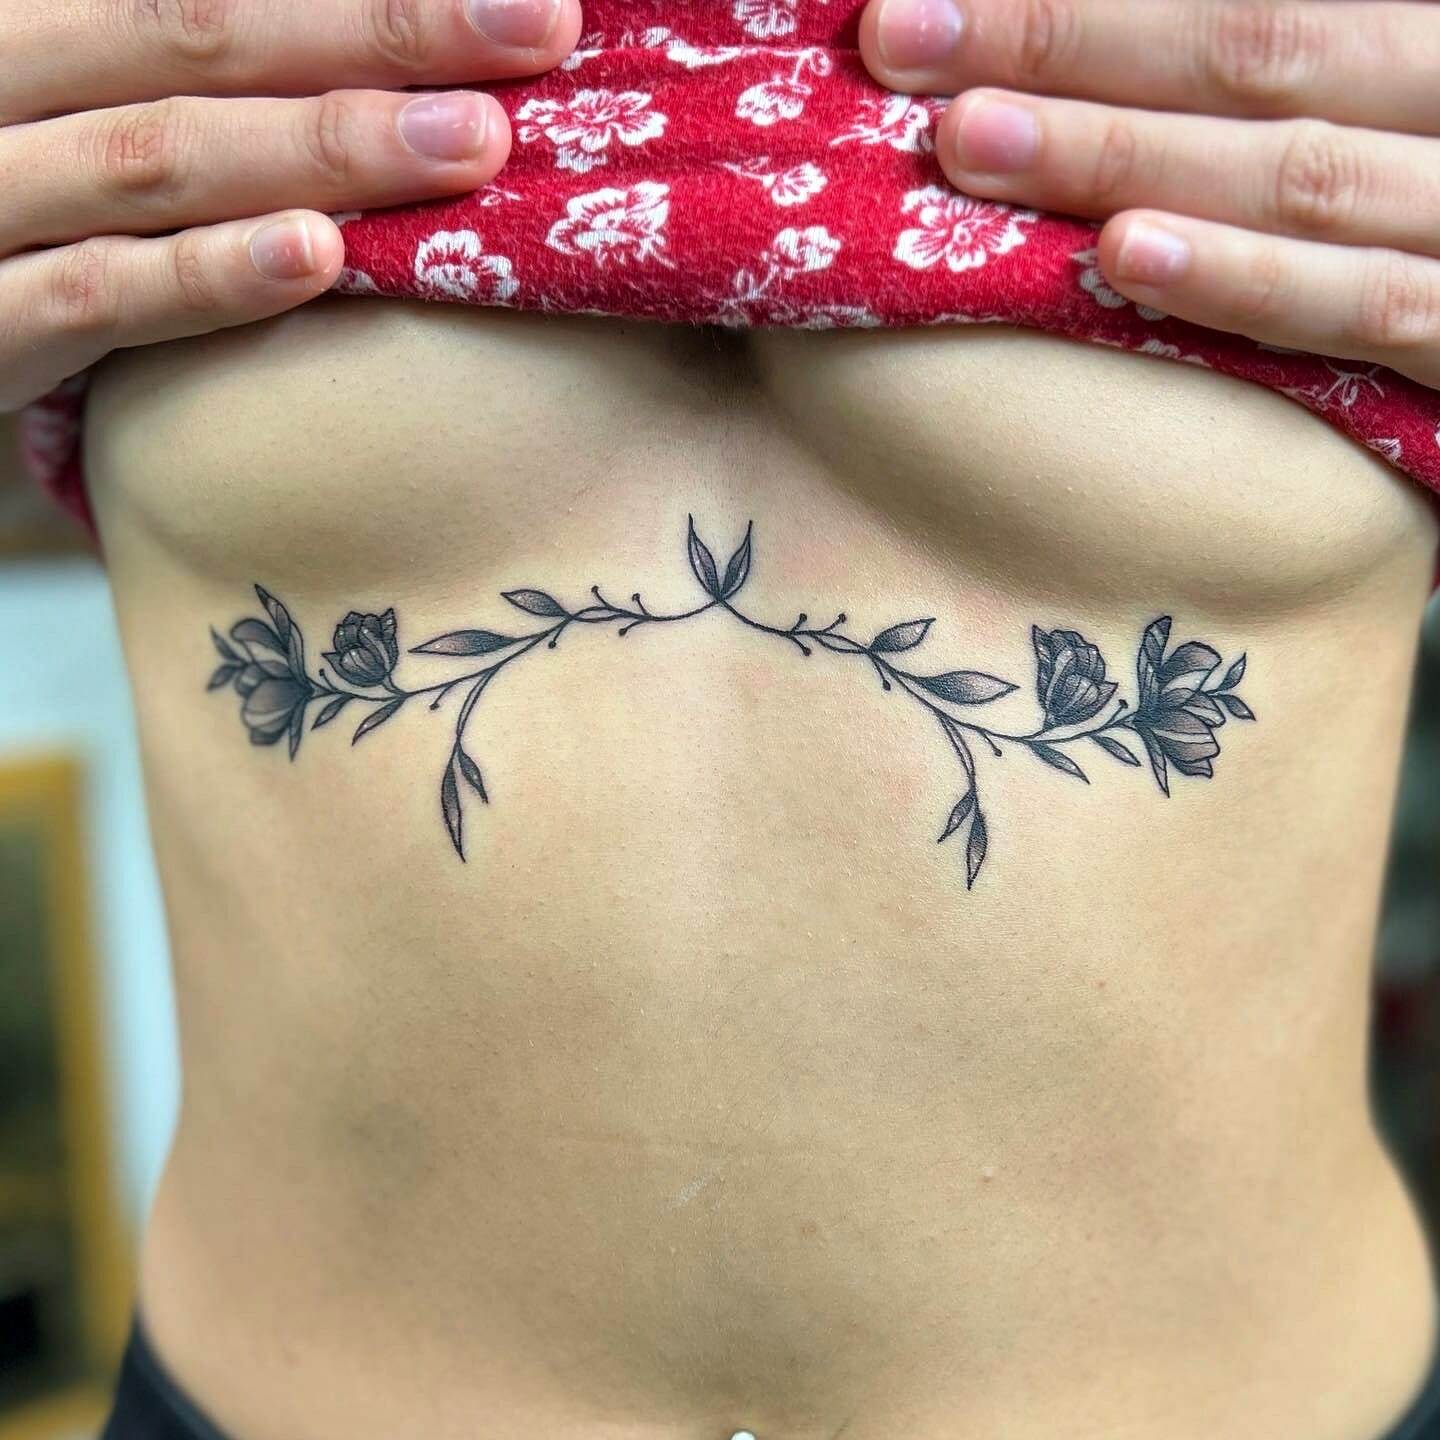 Celebrity Tattoo Artist Shares Best Placement Ideas to Conceal Ink